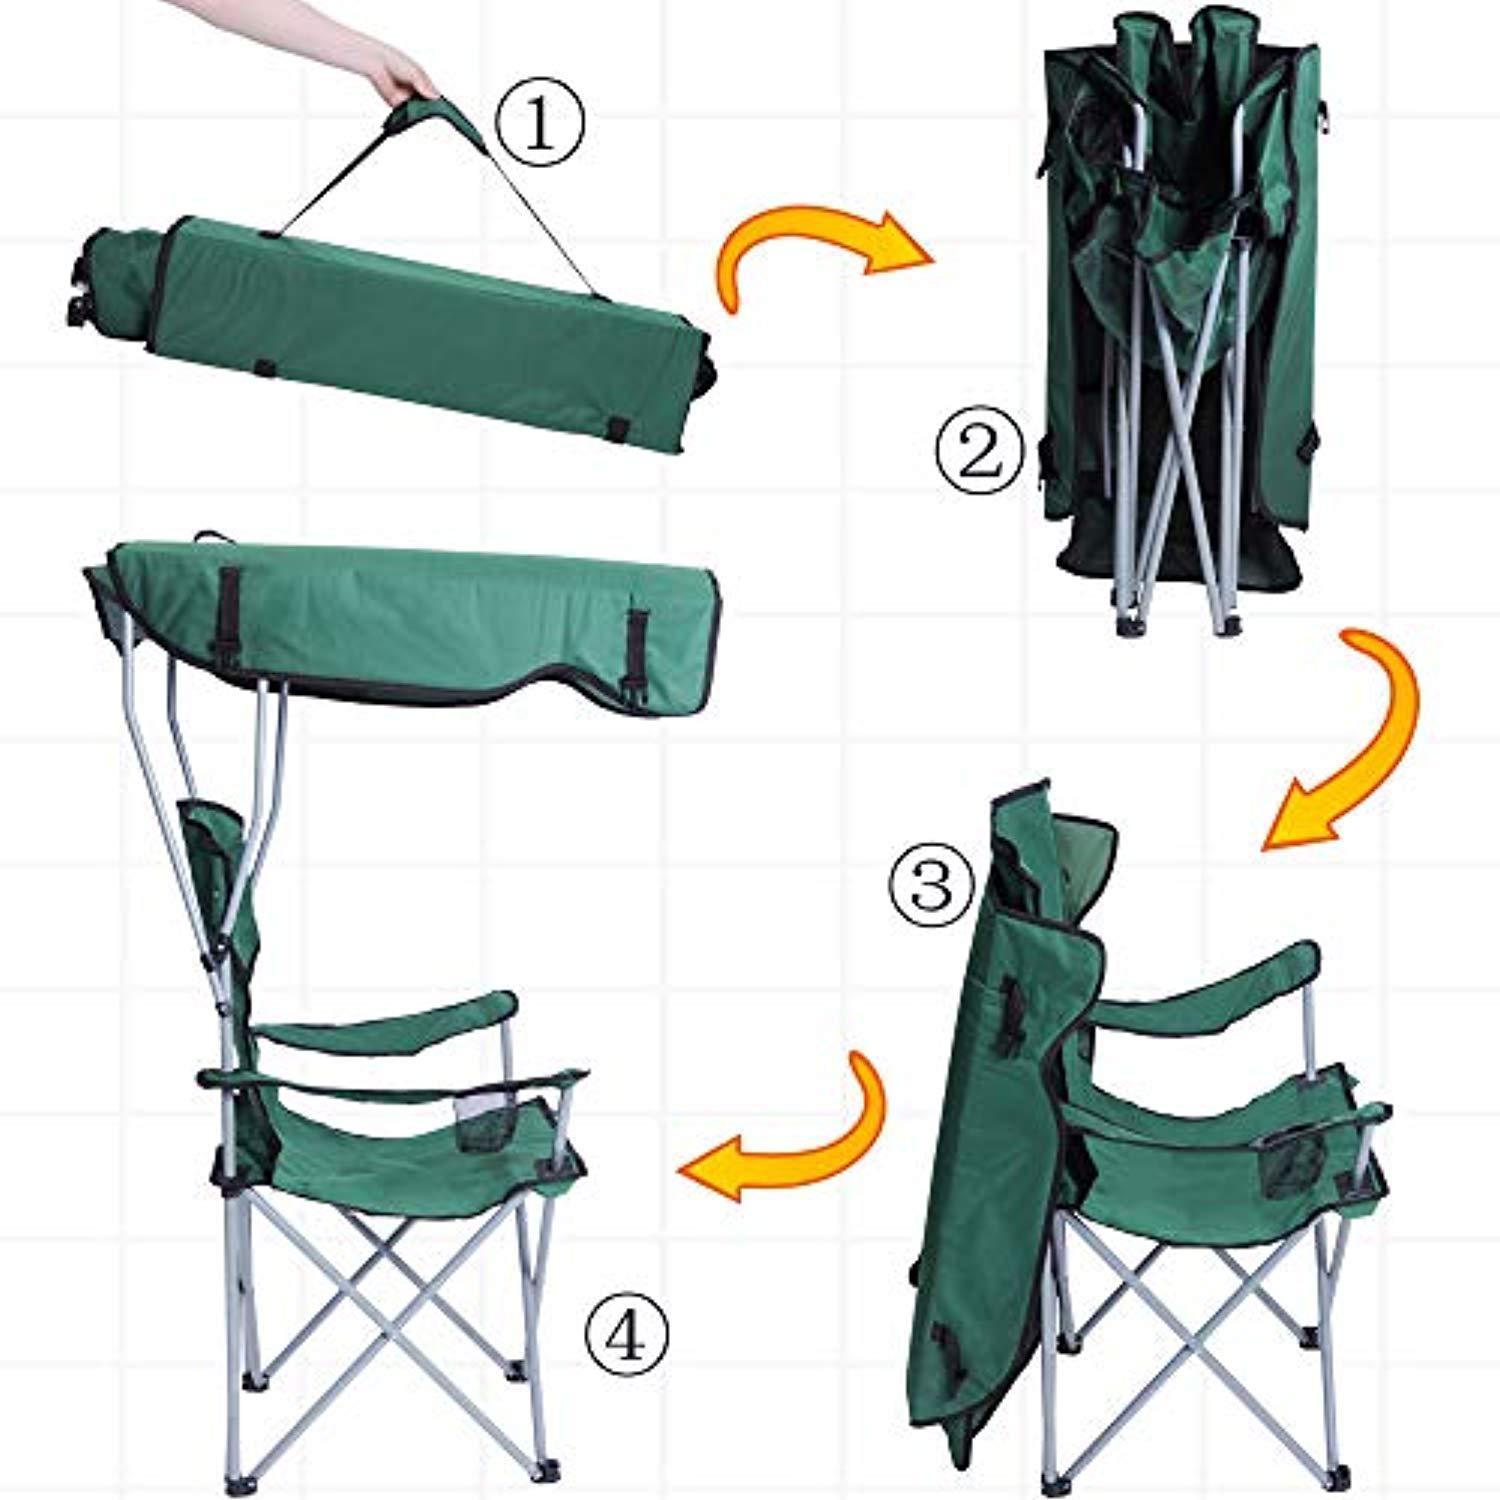 Bosonshop Portable Camping Chairs with Shade Canopy Original Green 30”Lx17”Wx50”H